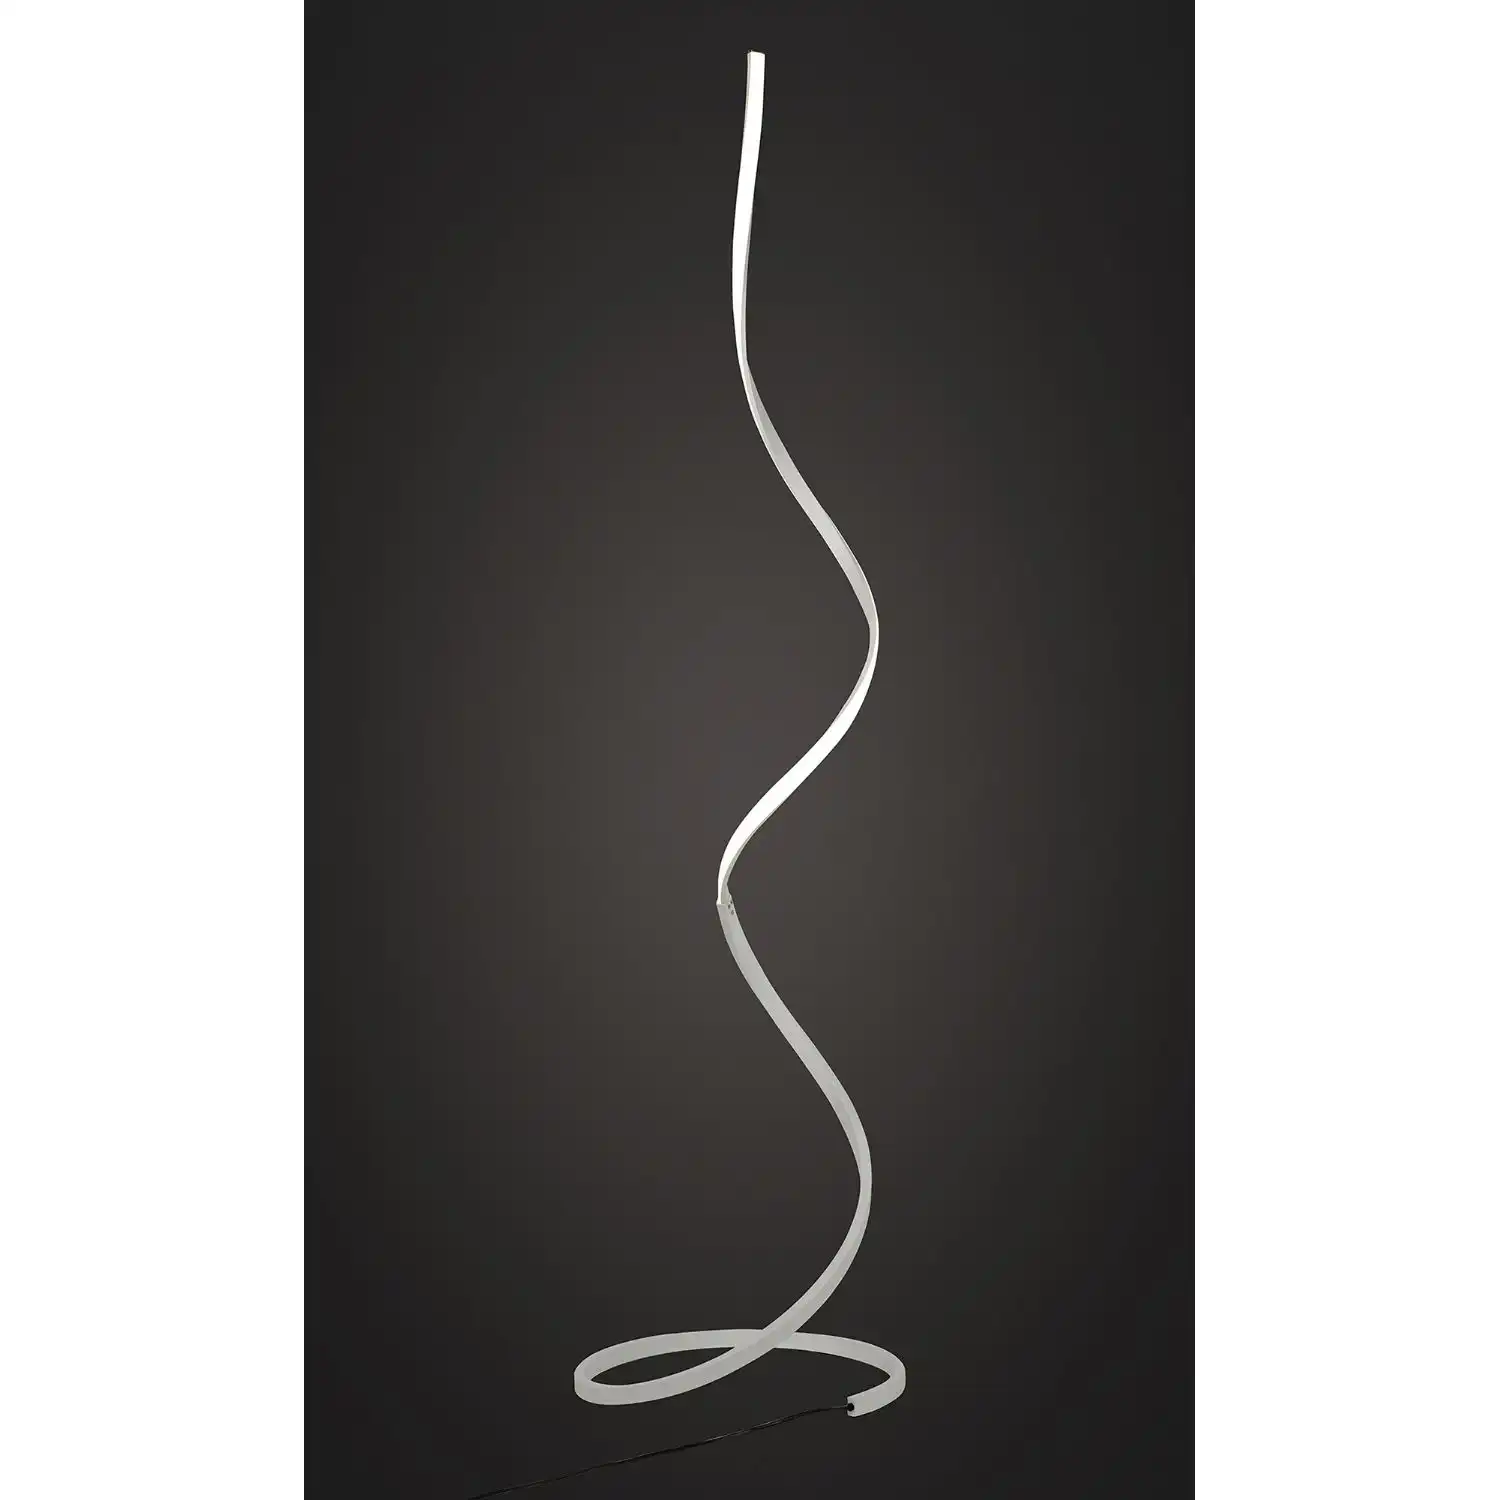 Nur Blanco XL Floor Lamp 22W LED 4000K, 1800lm, Dimmable, White Frosted Acrylic, 3yrs Warranty